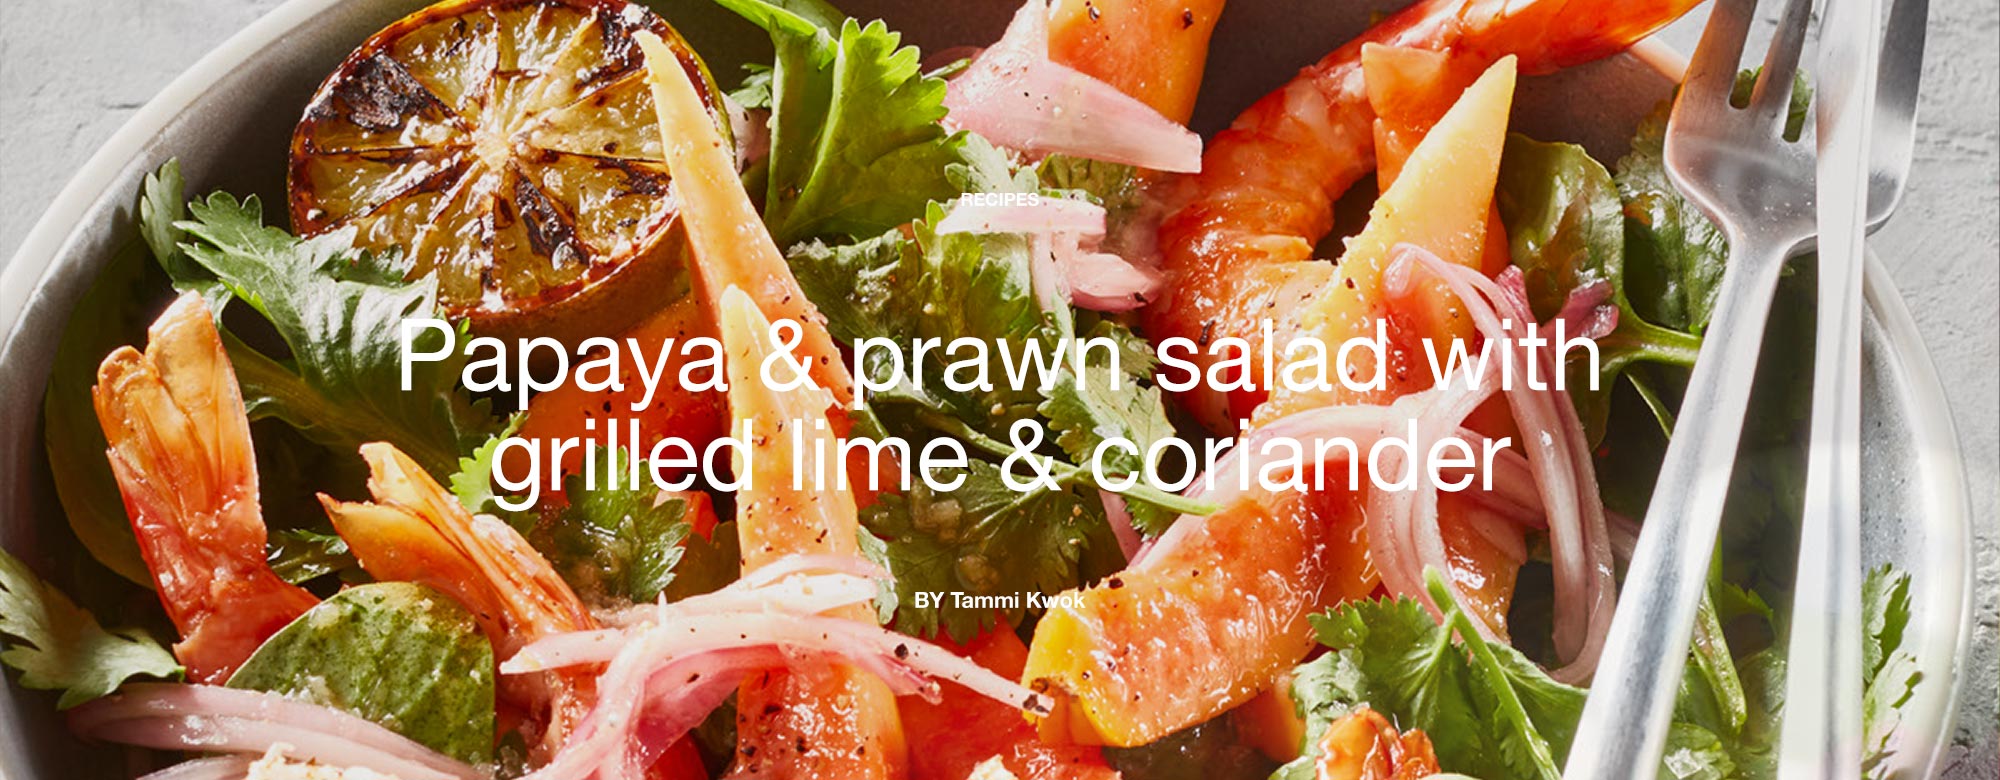 Papaya and prawn salad with grilled lime and coriander